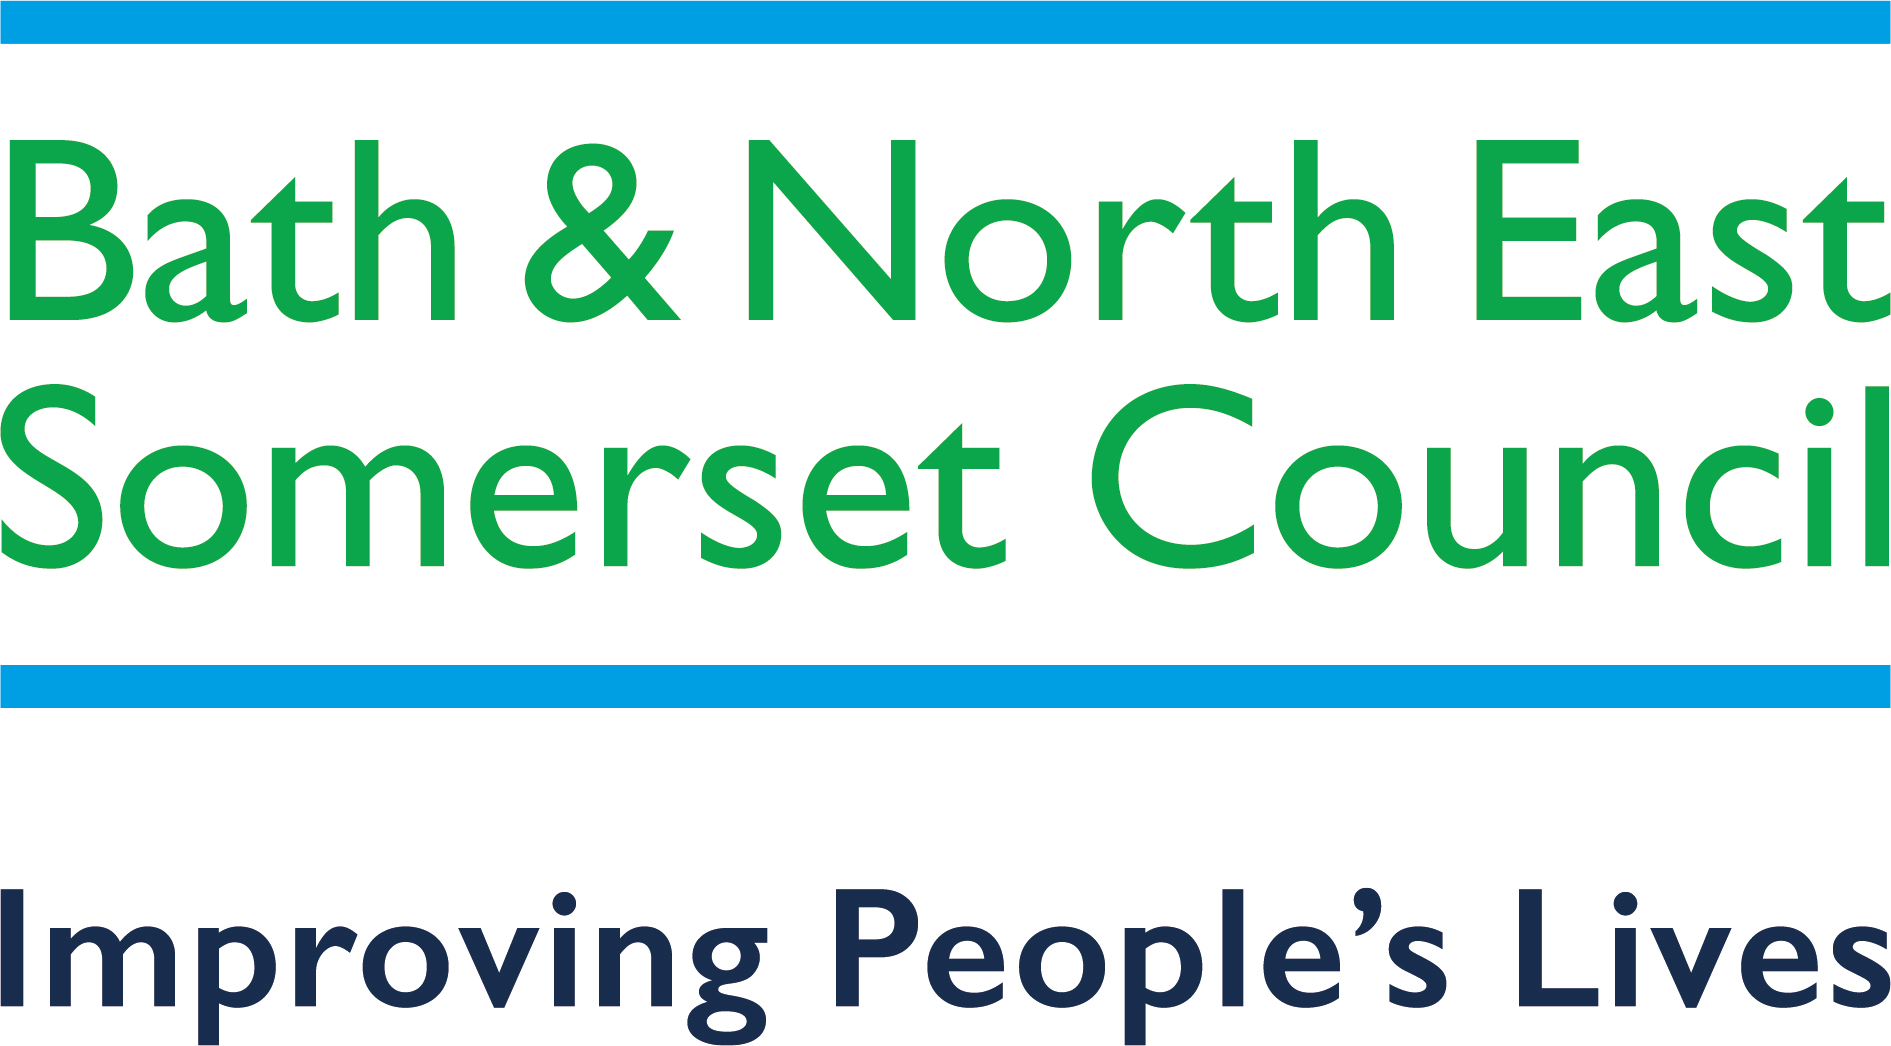 Bath & North East Somerset Council 